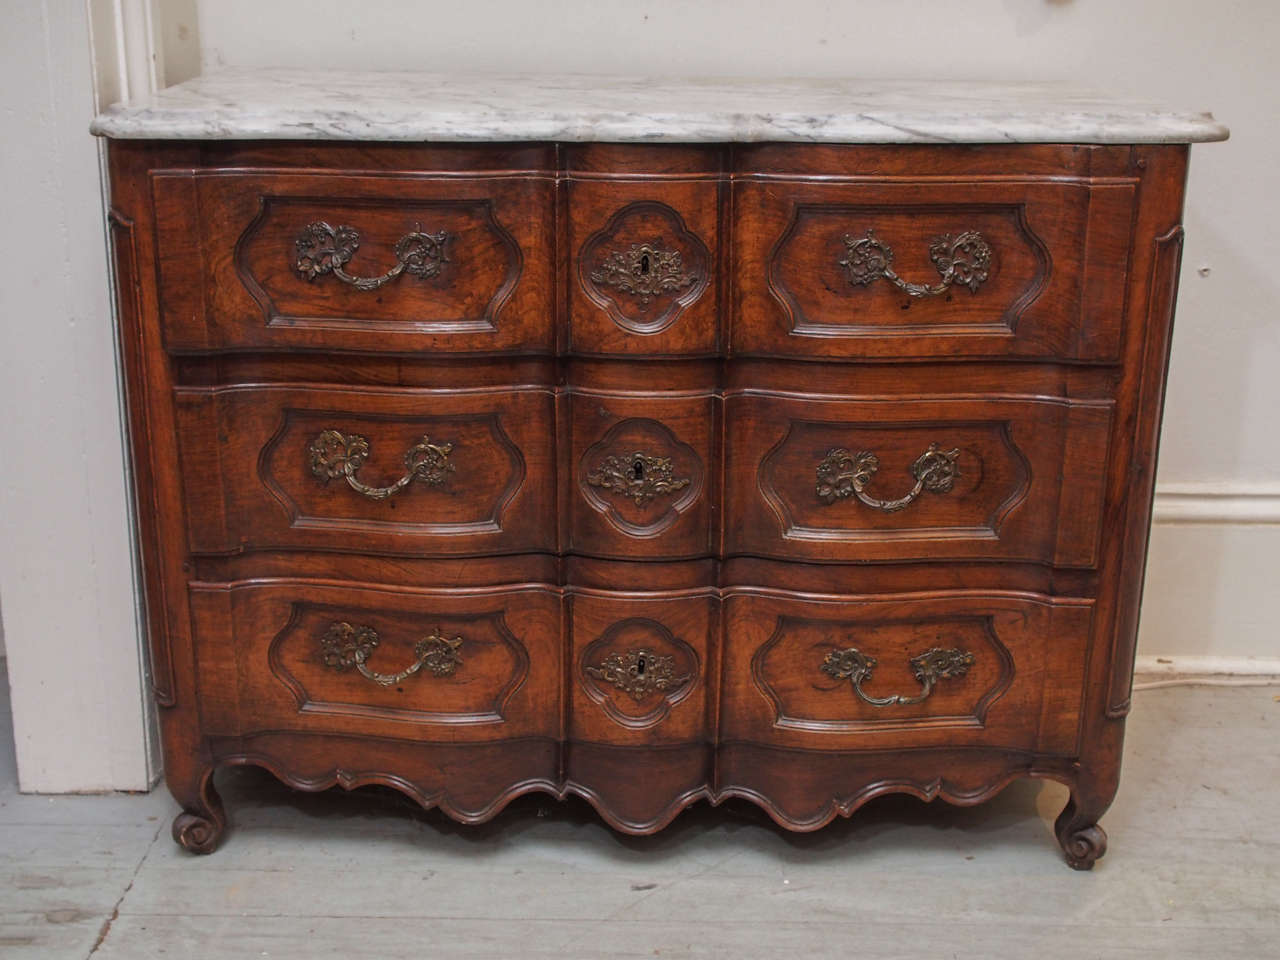 Serpentine Front and Carved Walnut Louis XV French Commode.